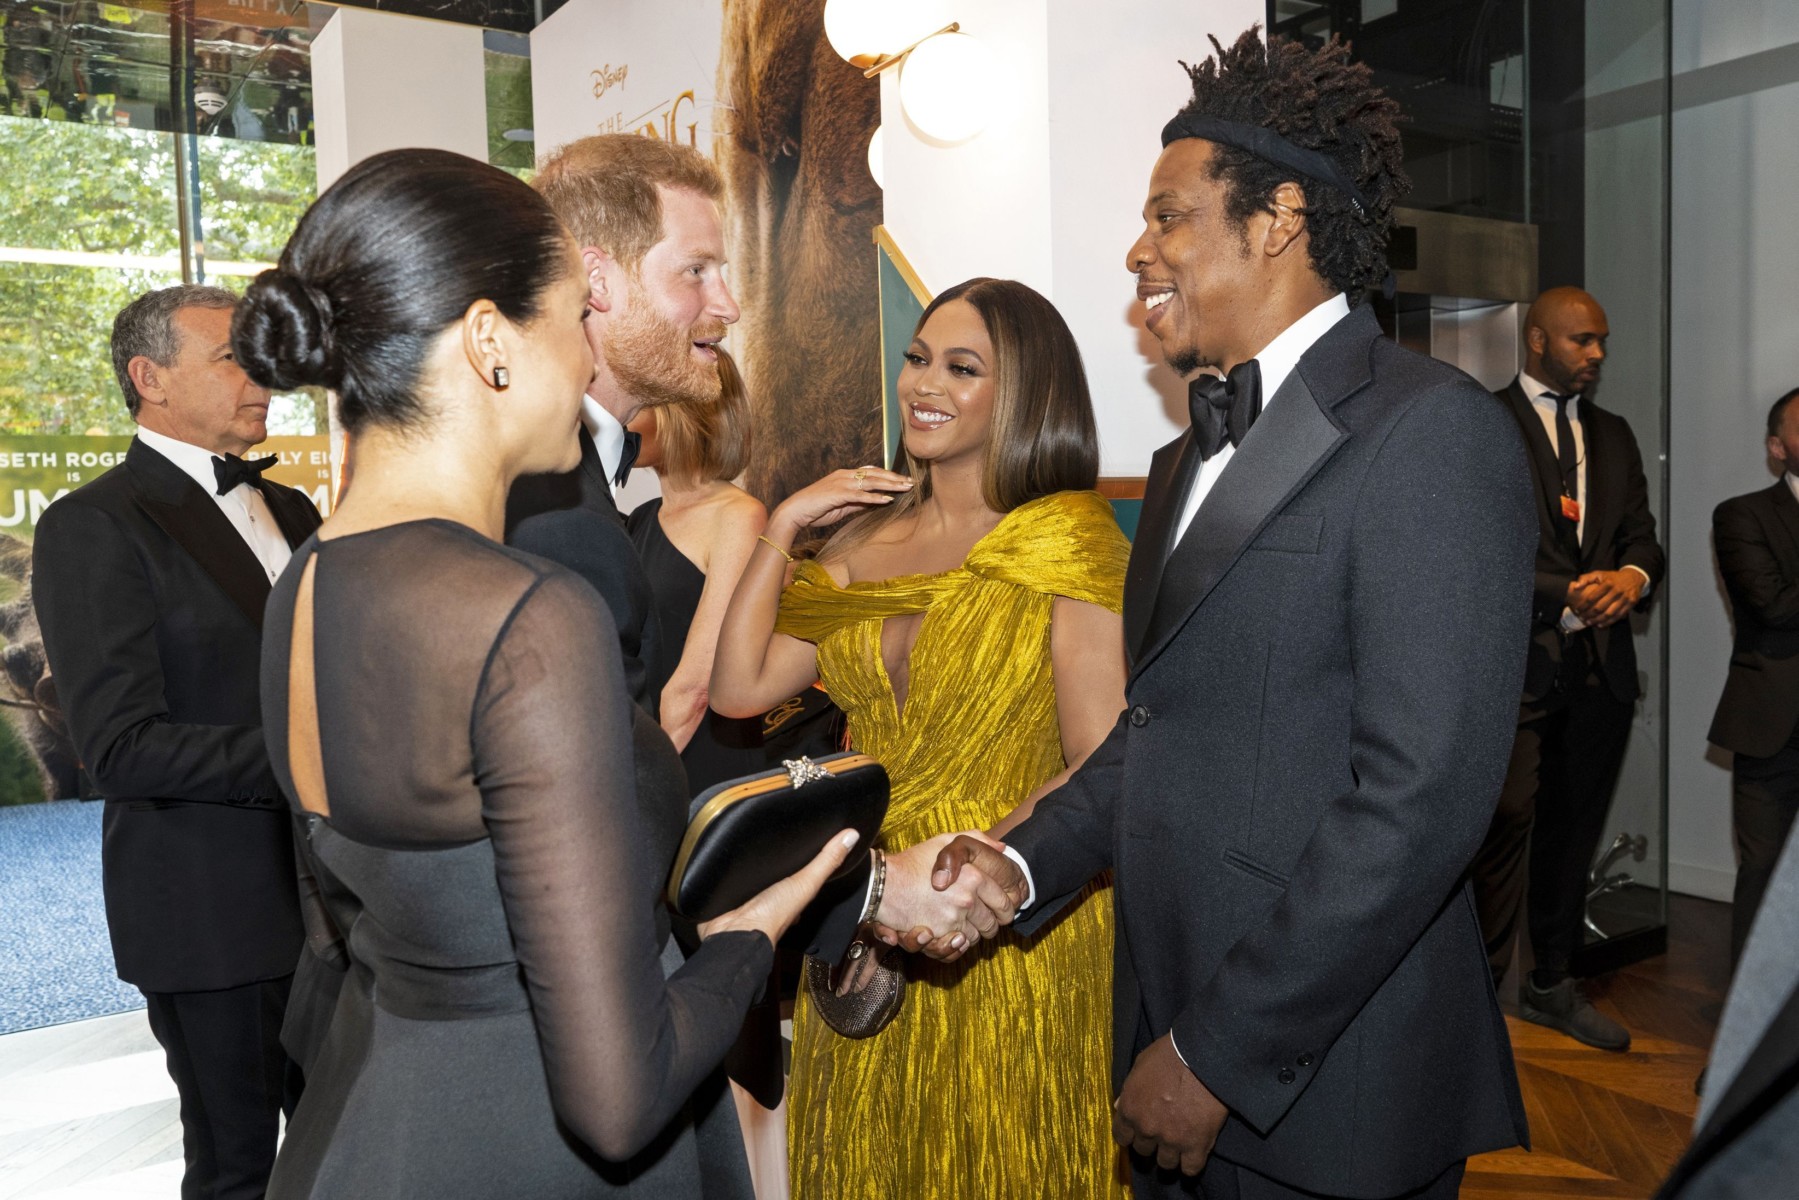 The Duke and Duchess of Sussex met Beyonce and Jay-Z at the Lion King premiere